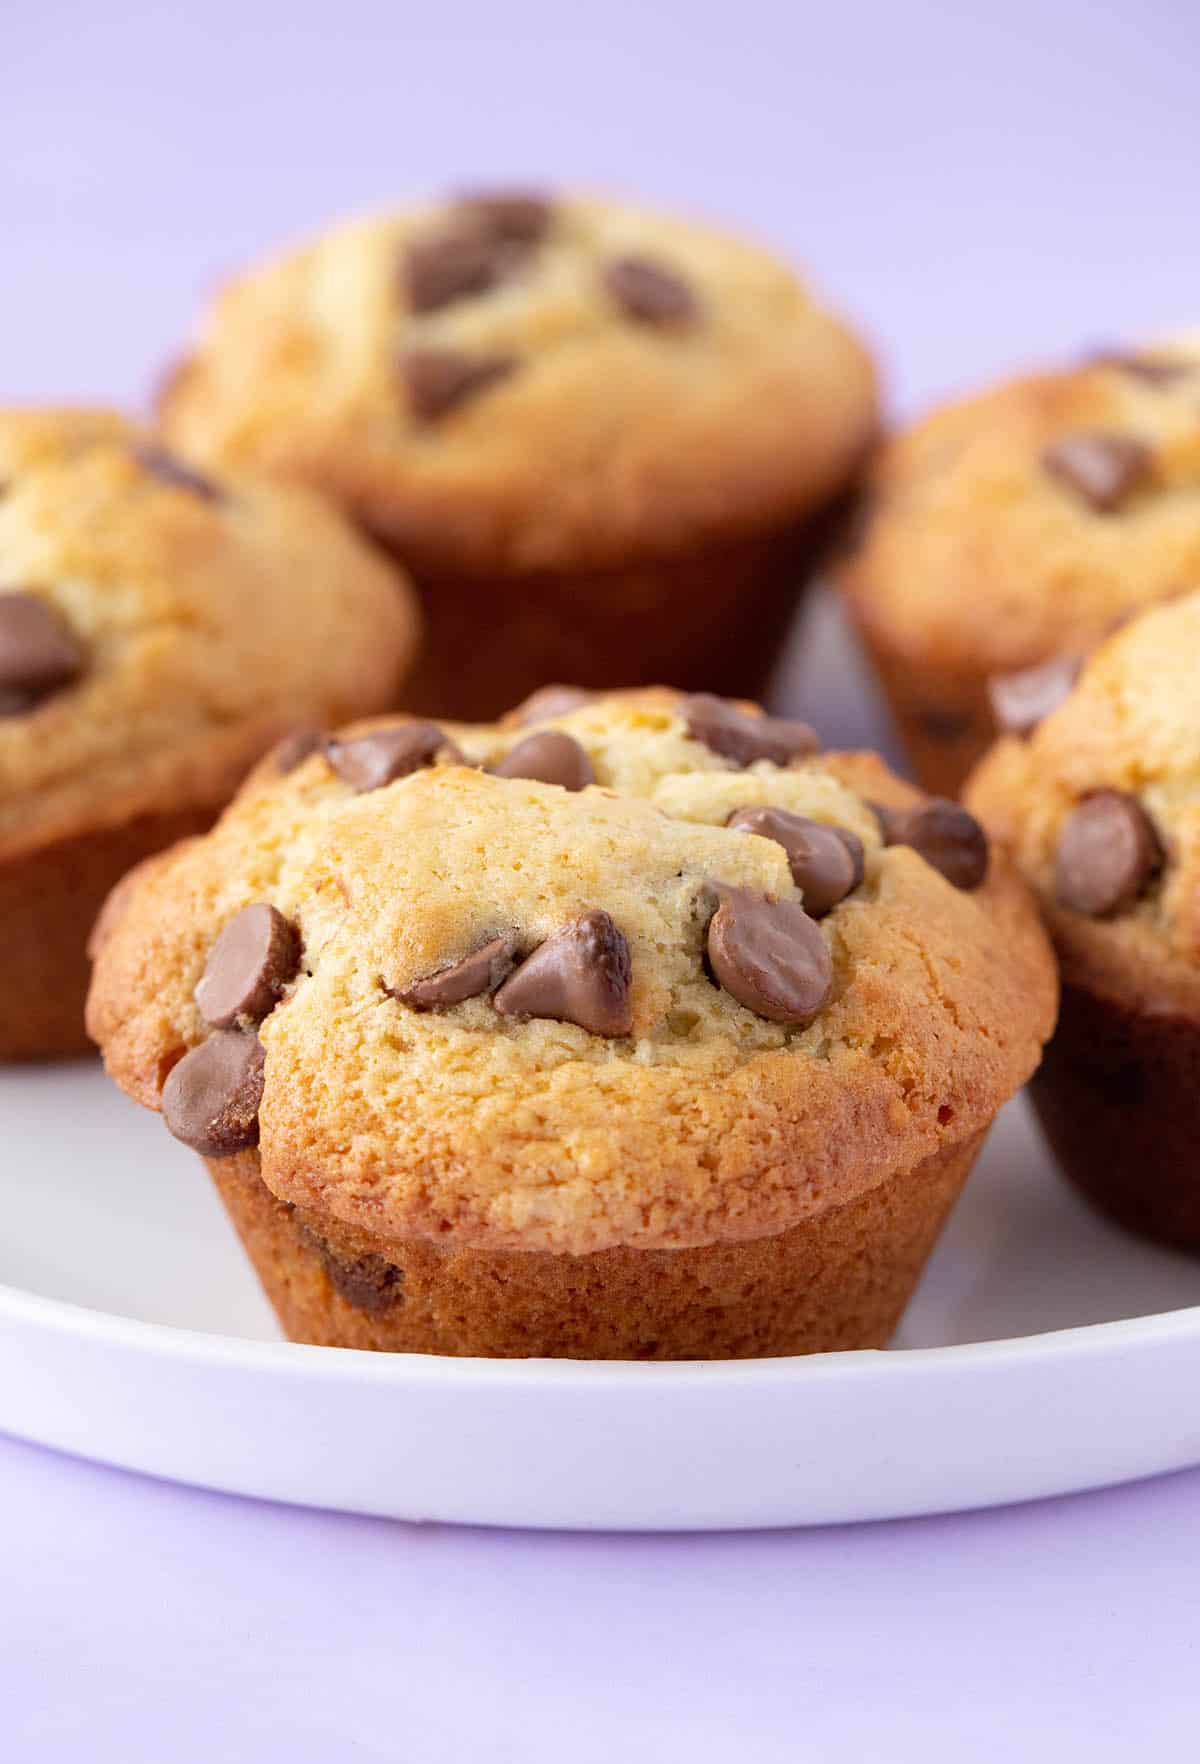 A plate of homemade Chocolate Chip Muffins.